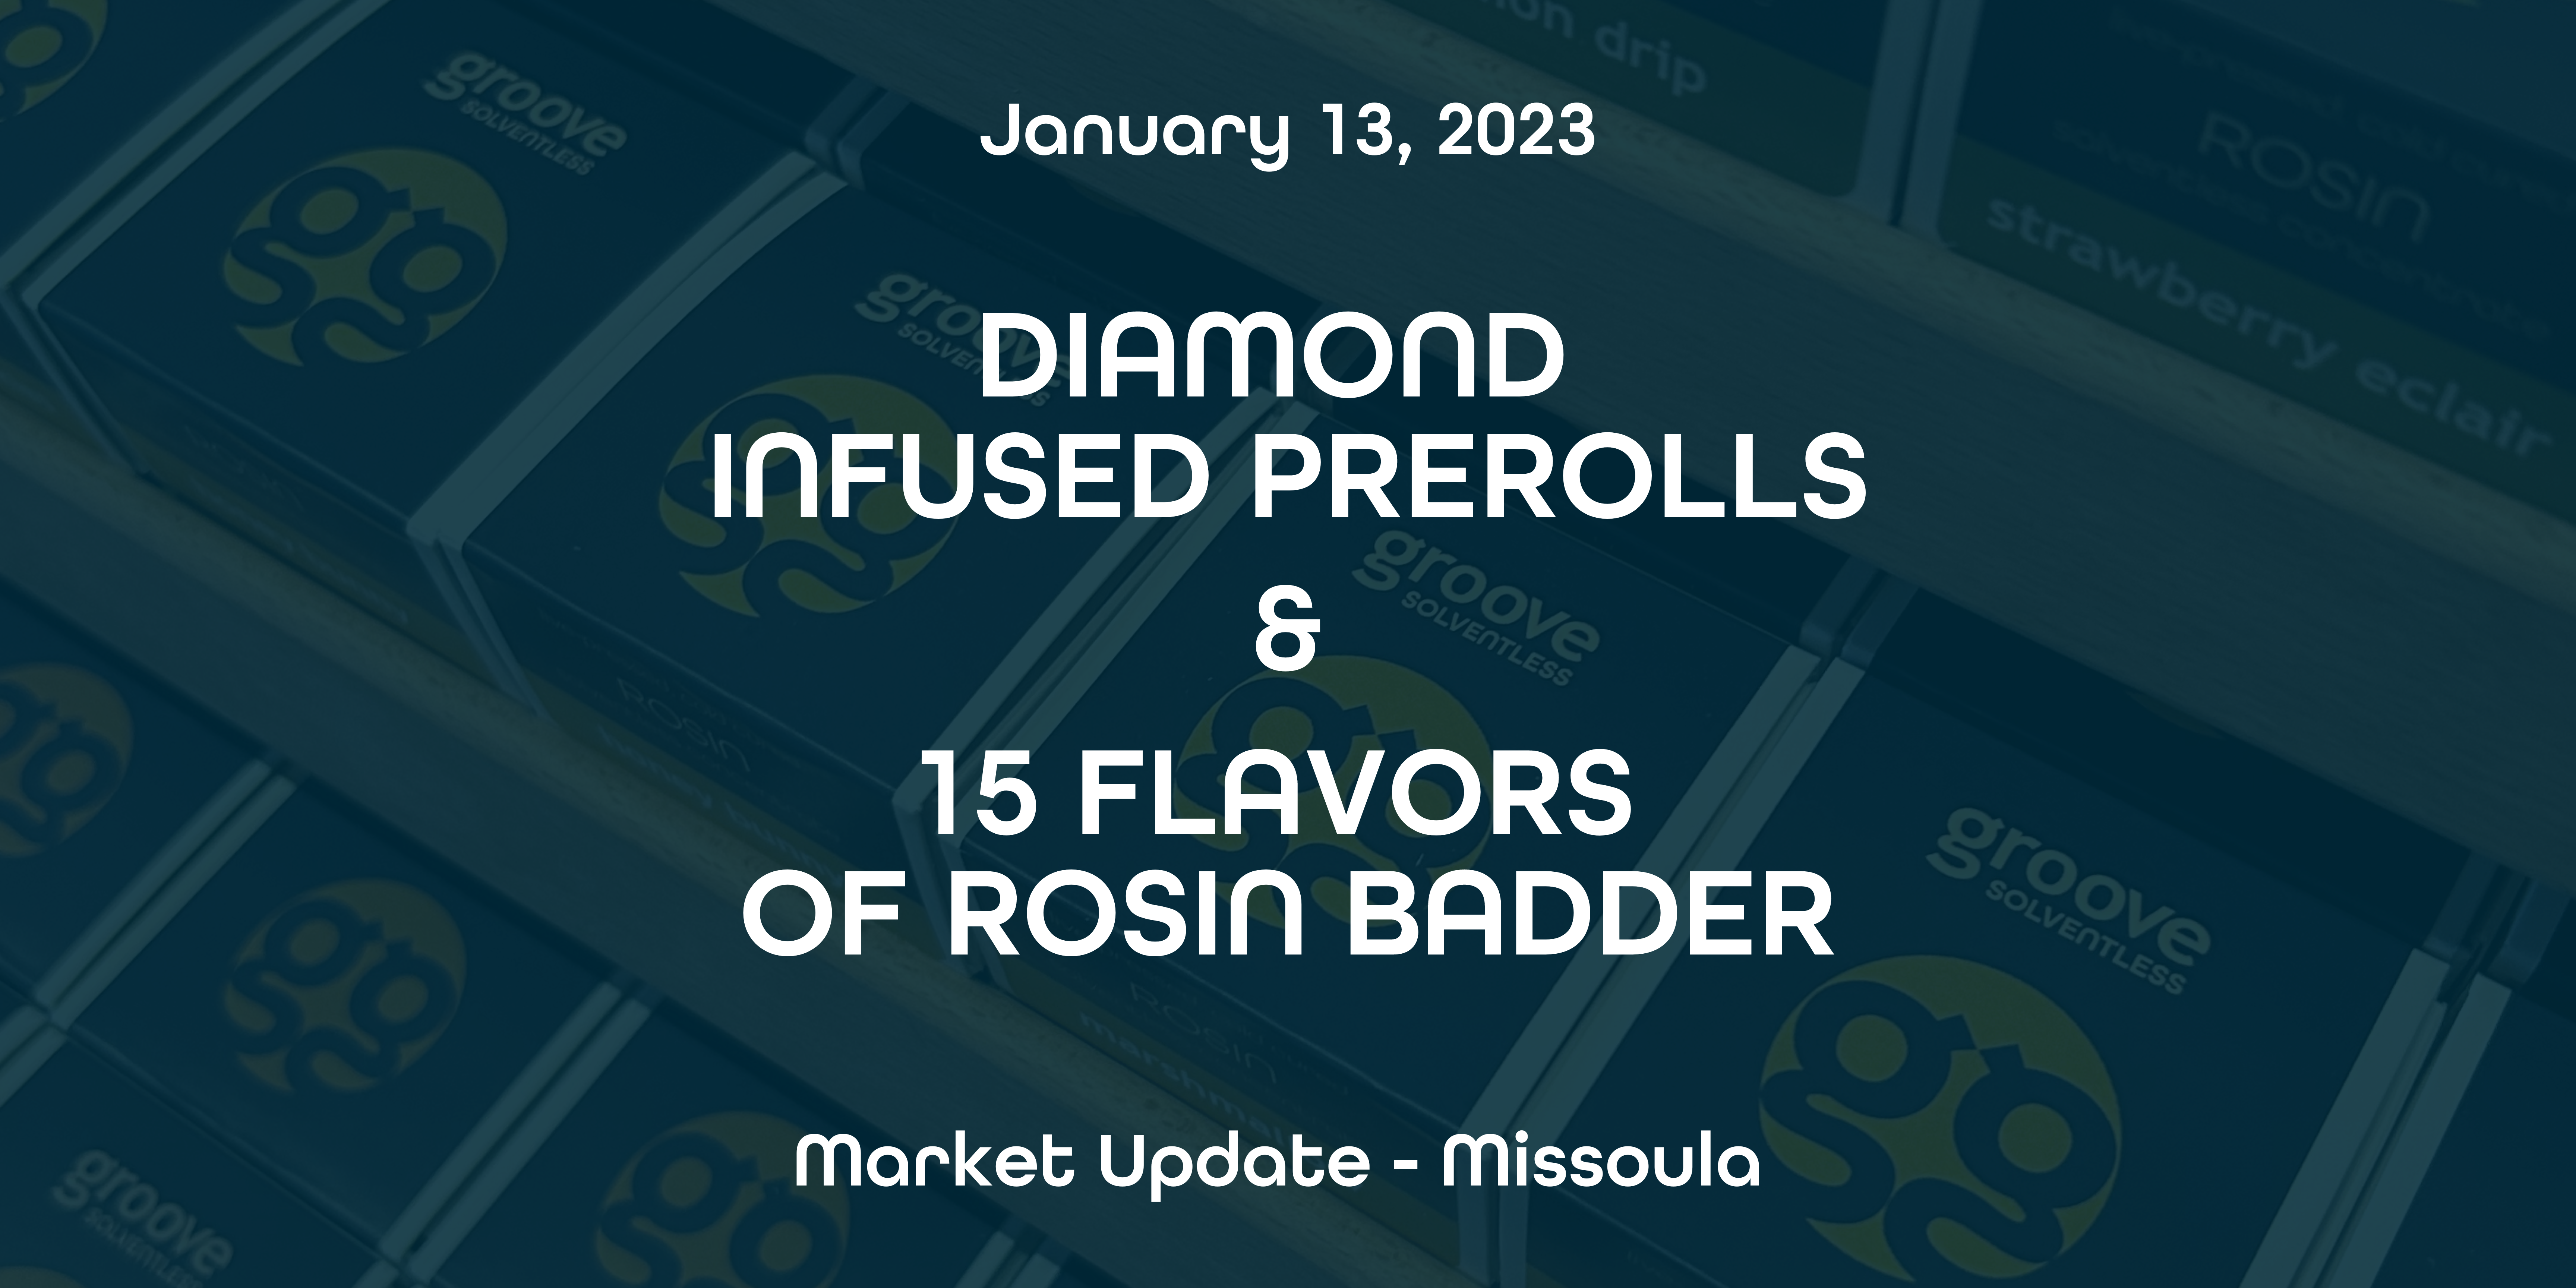 Announcement: Diamond Infused PreRolls and 15 Flavors of Badder